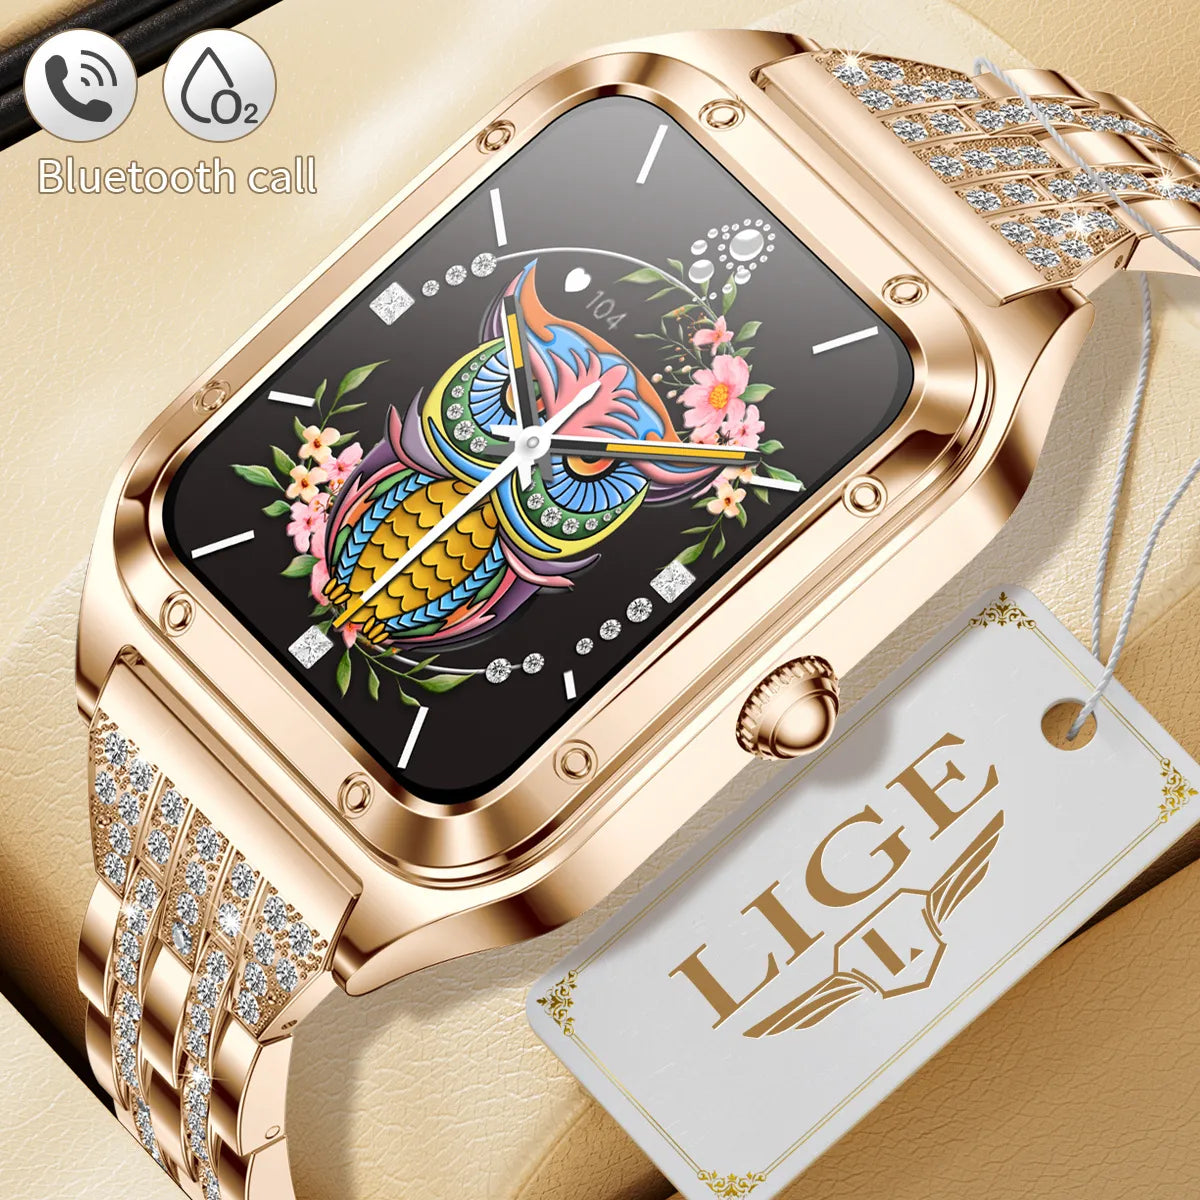 LIGE Women's Smartwatch with Bluetooth Call and Blood Pressure Monitor